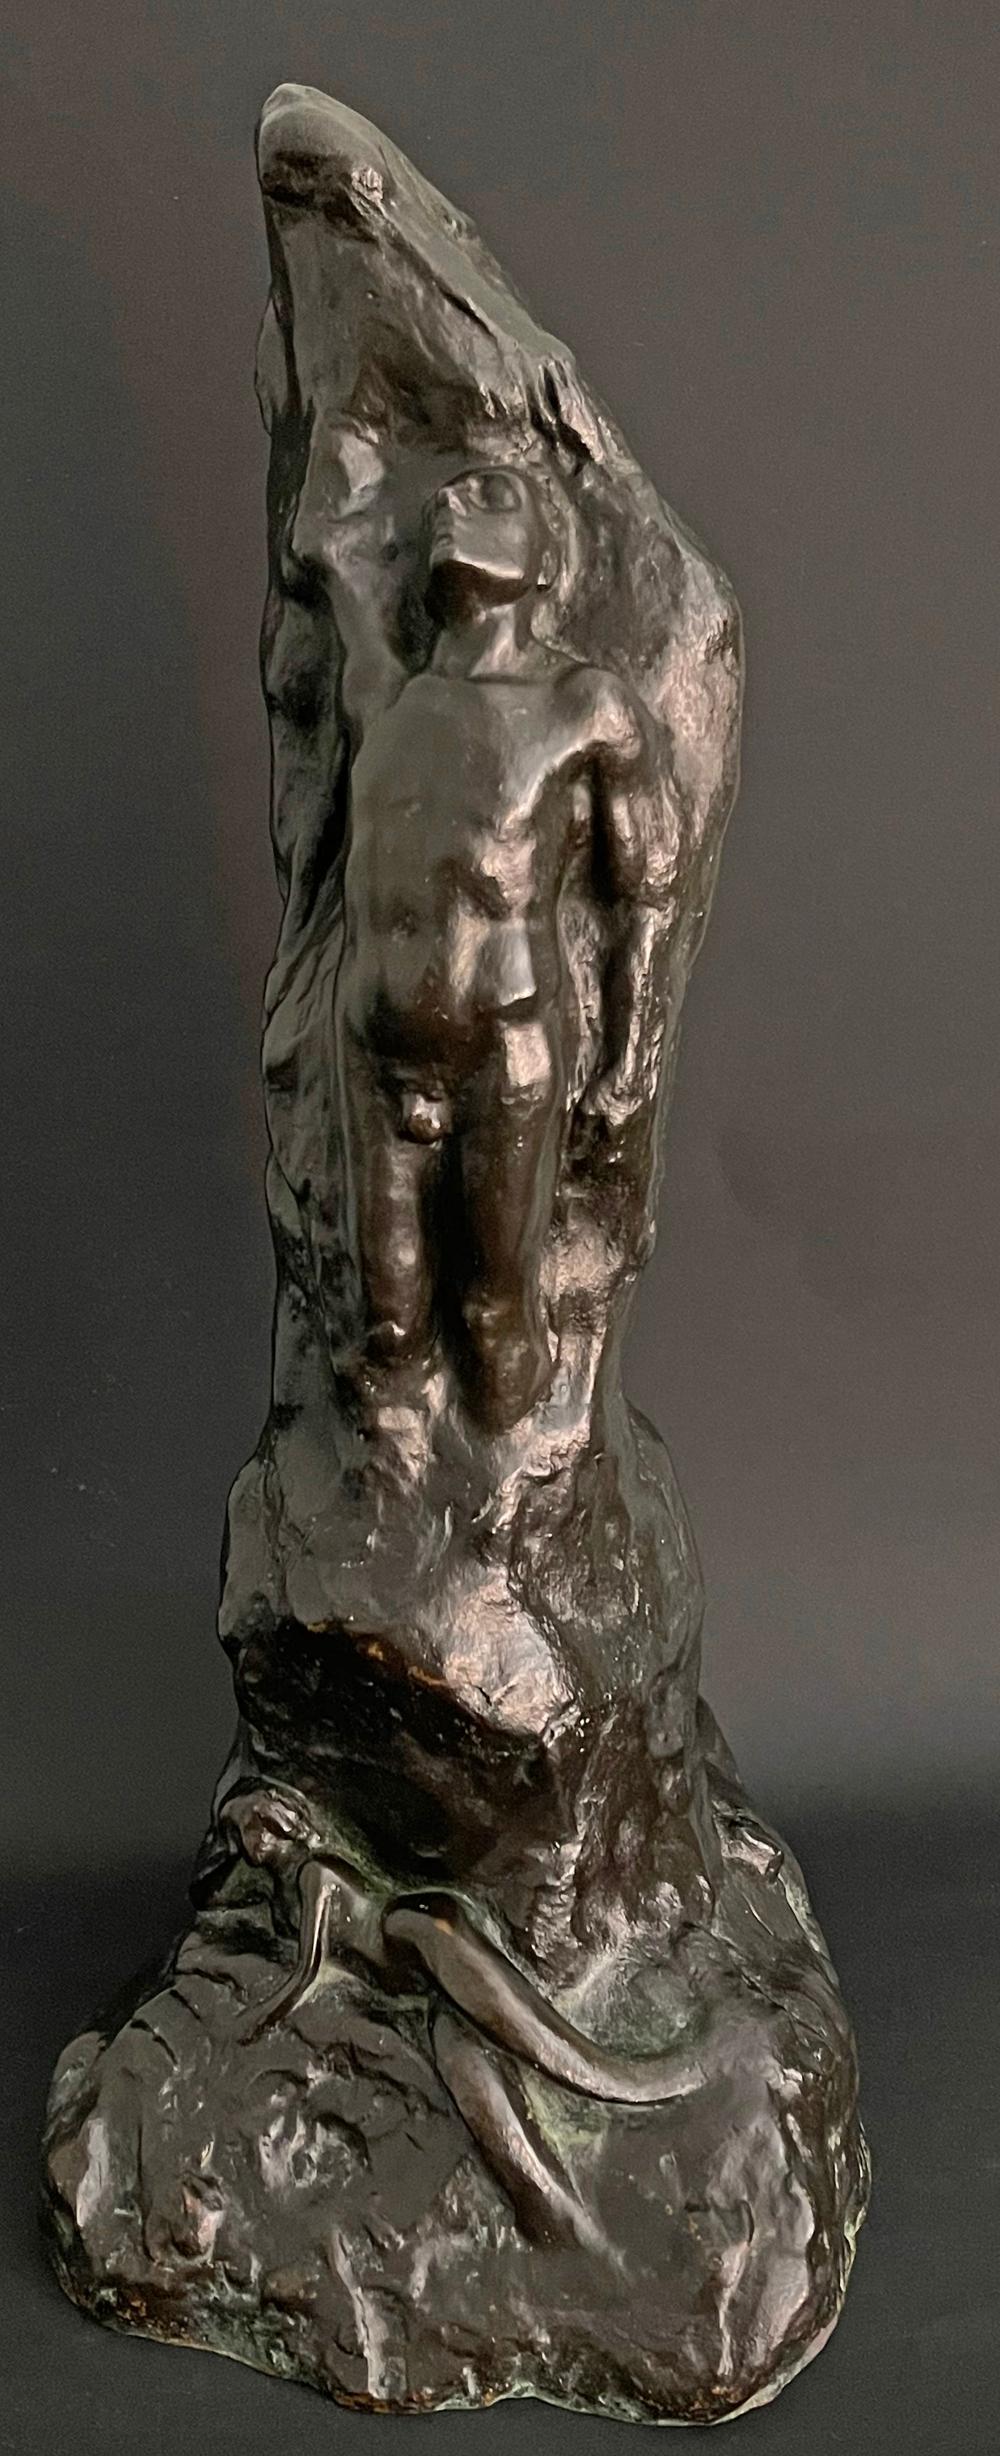 Clearly showing the influence of Auguste Rodin and the Art Nouveau movement, this remarkable bronze was sculpted by David Edstrom, a Swedish American artist. Here, a nude male figure is perched on the edge of a cliff, looking heavenward as a nude